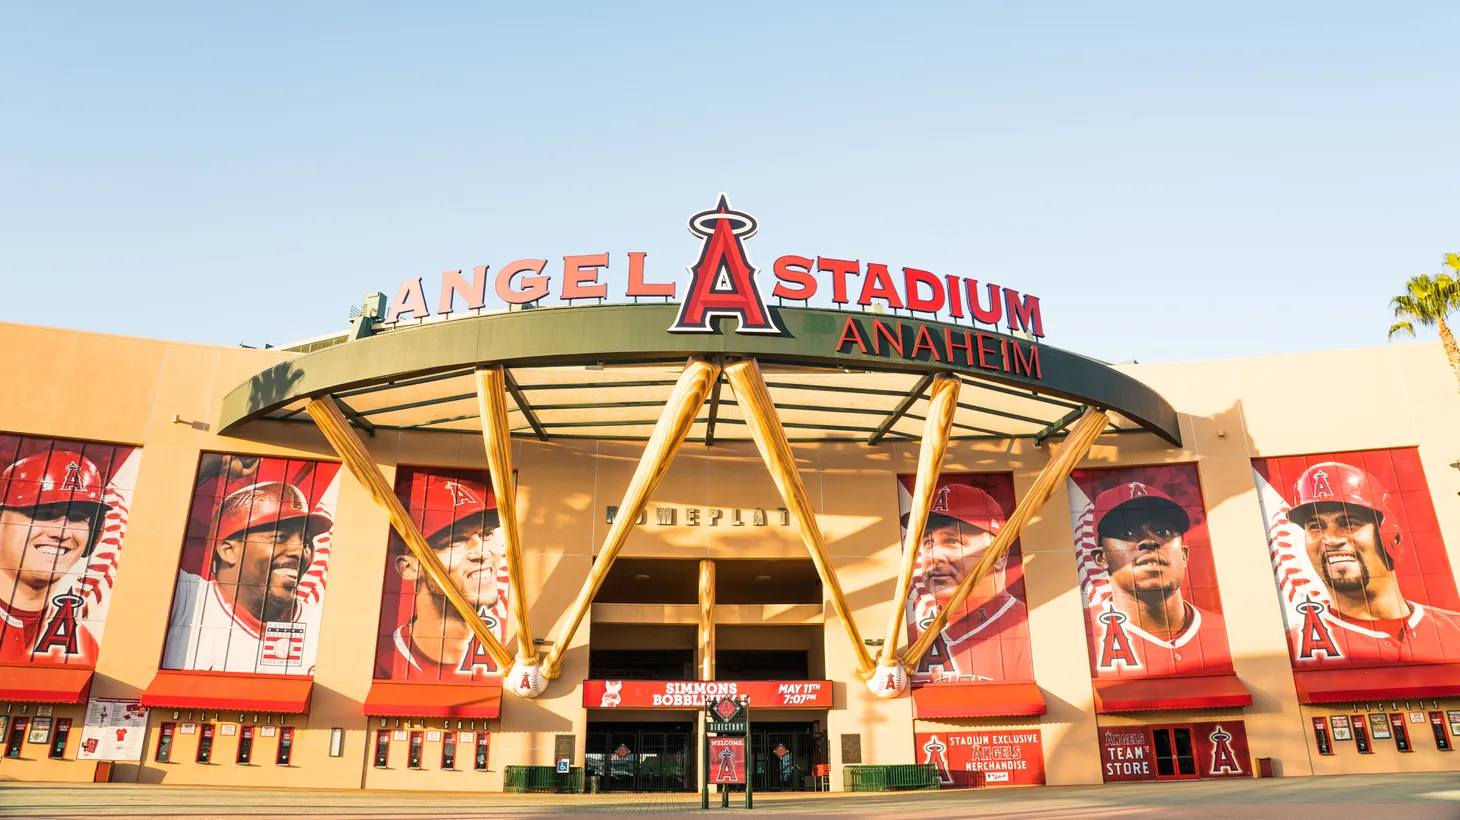 The proposed sale of Angel Stadium of Anaheim is now on hold and under FBI investigation, along with Anaheim’s former mayor, Harry Sidhu.